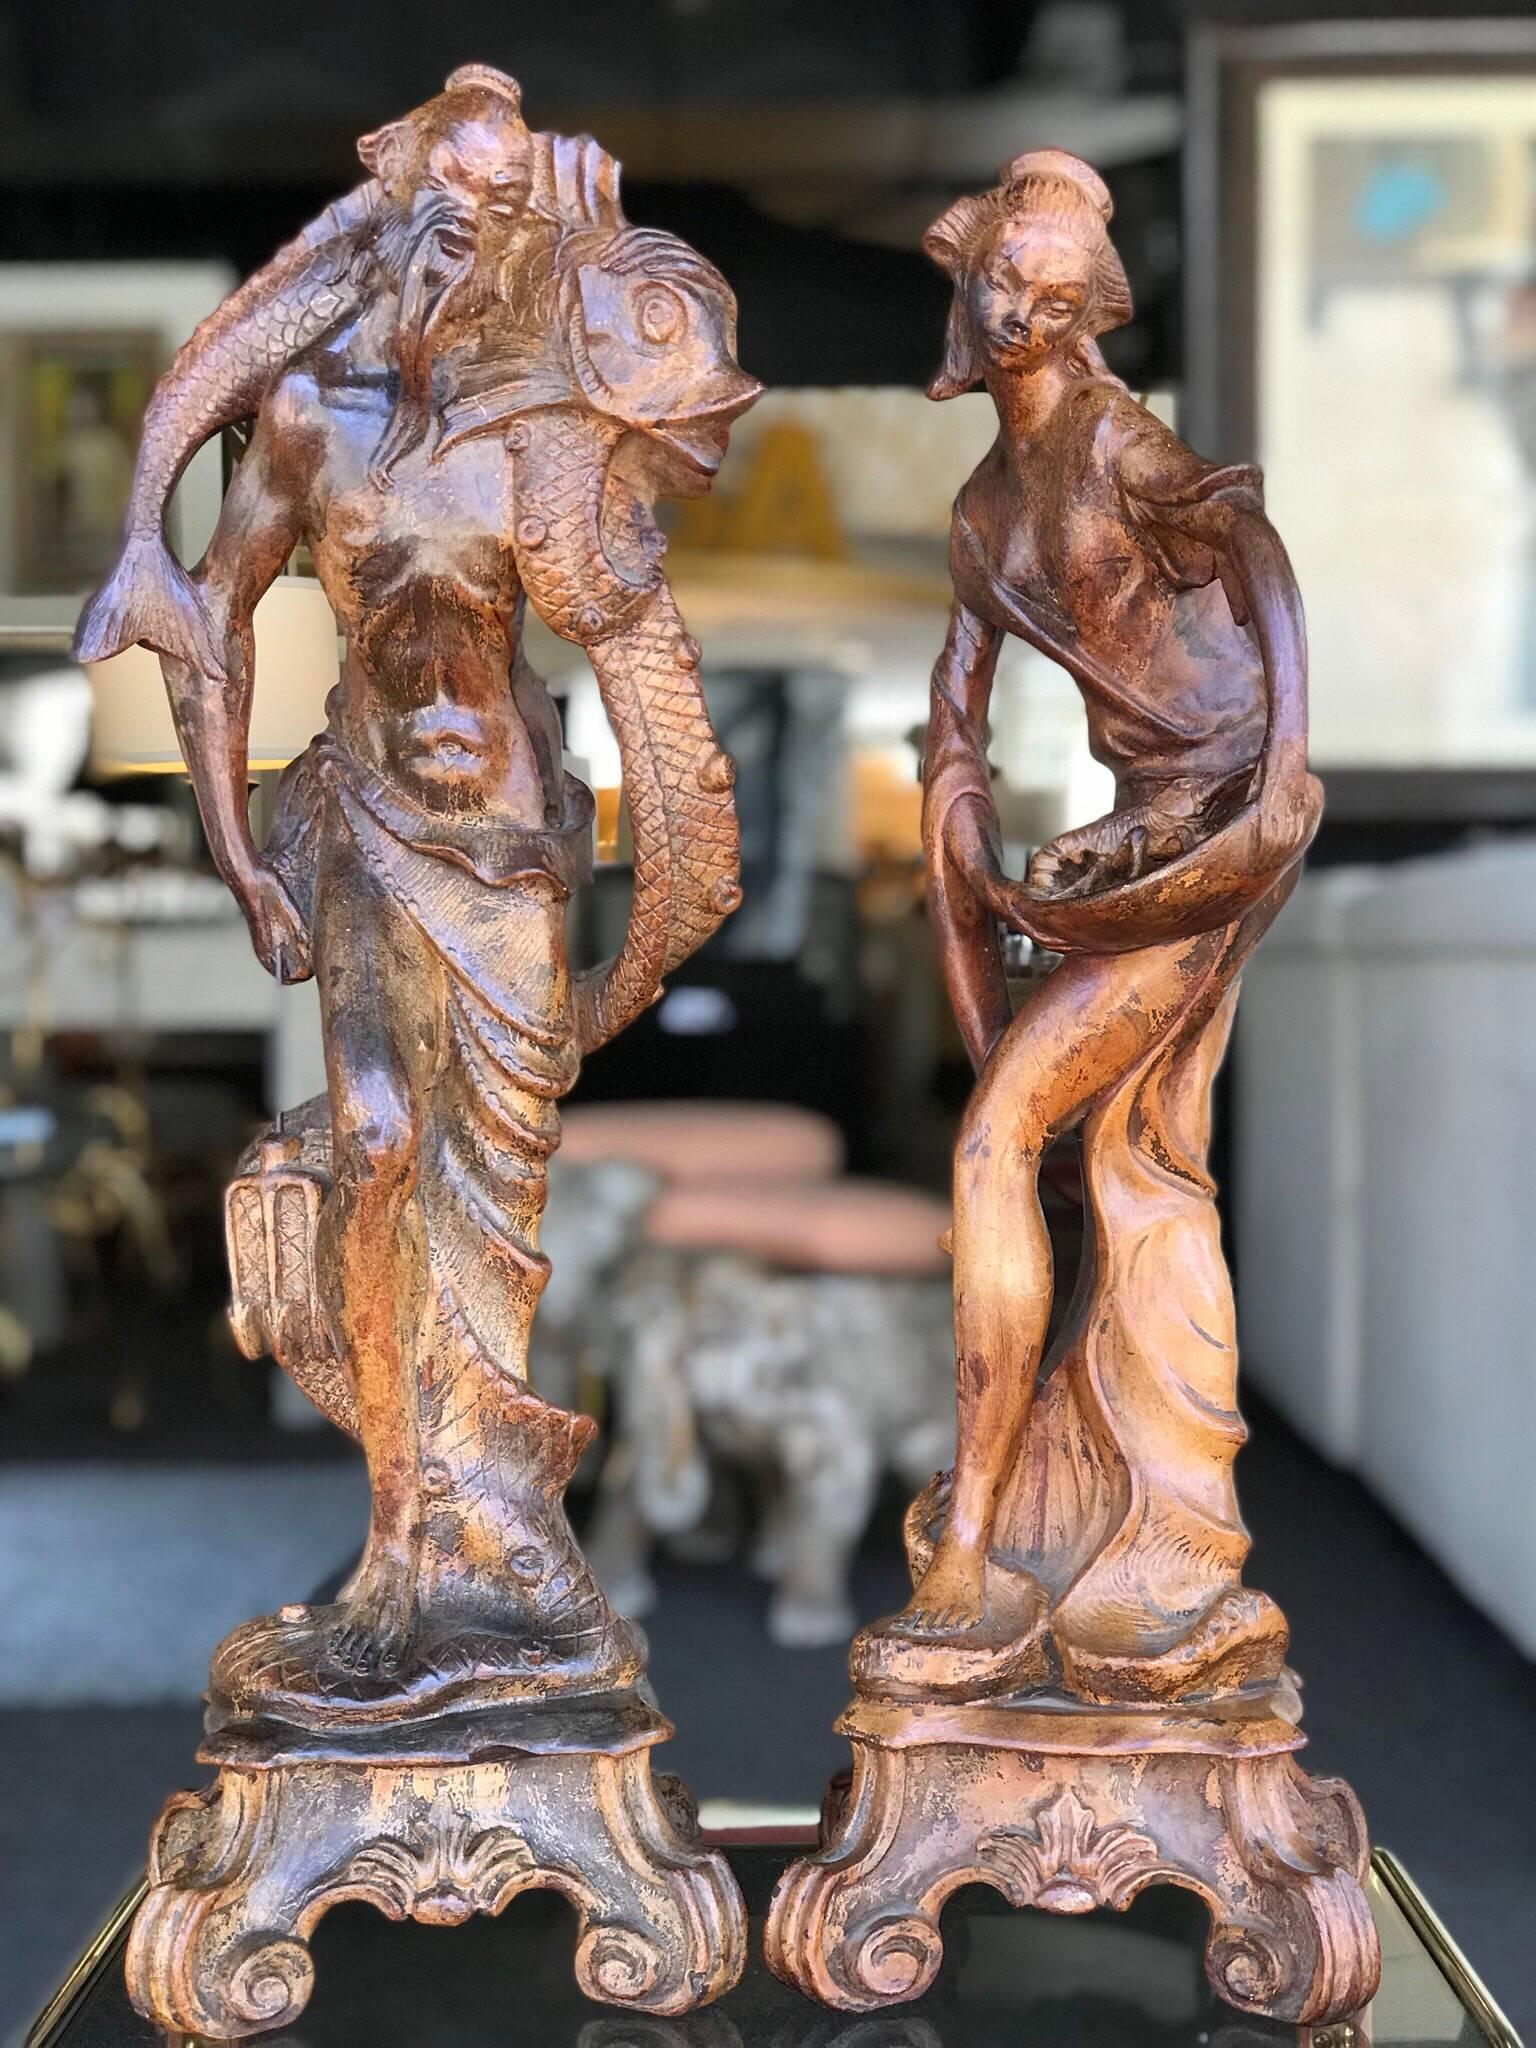 This beautiful pair of chinoiserie statues of a man and woman came from the Estate of Keely Smith and her husband Lois Prima. A collector of beautiful Chinese furniture and art, most came from the 1960s Las Vegas estate they had while headlining in